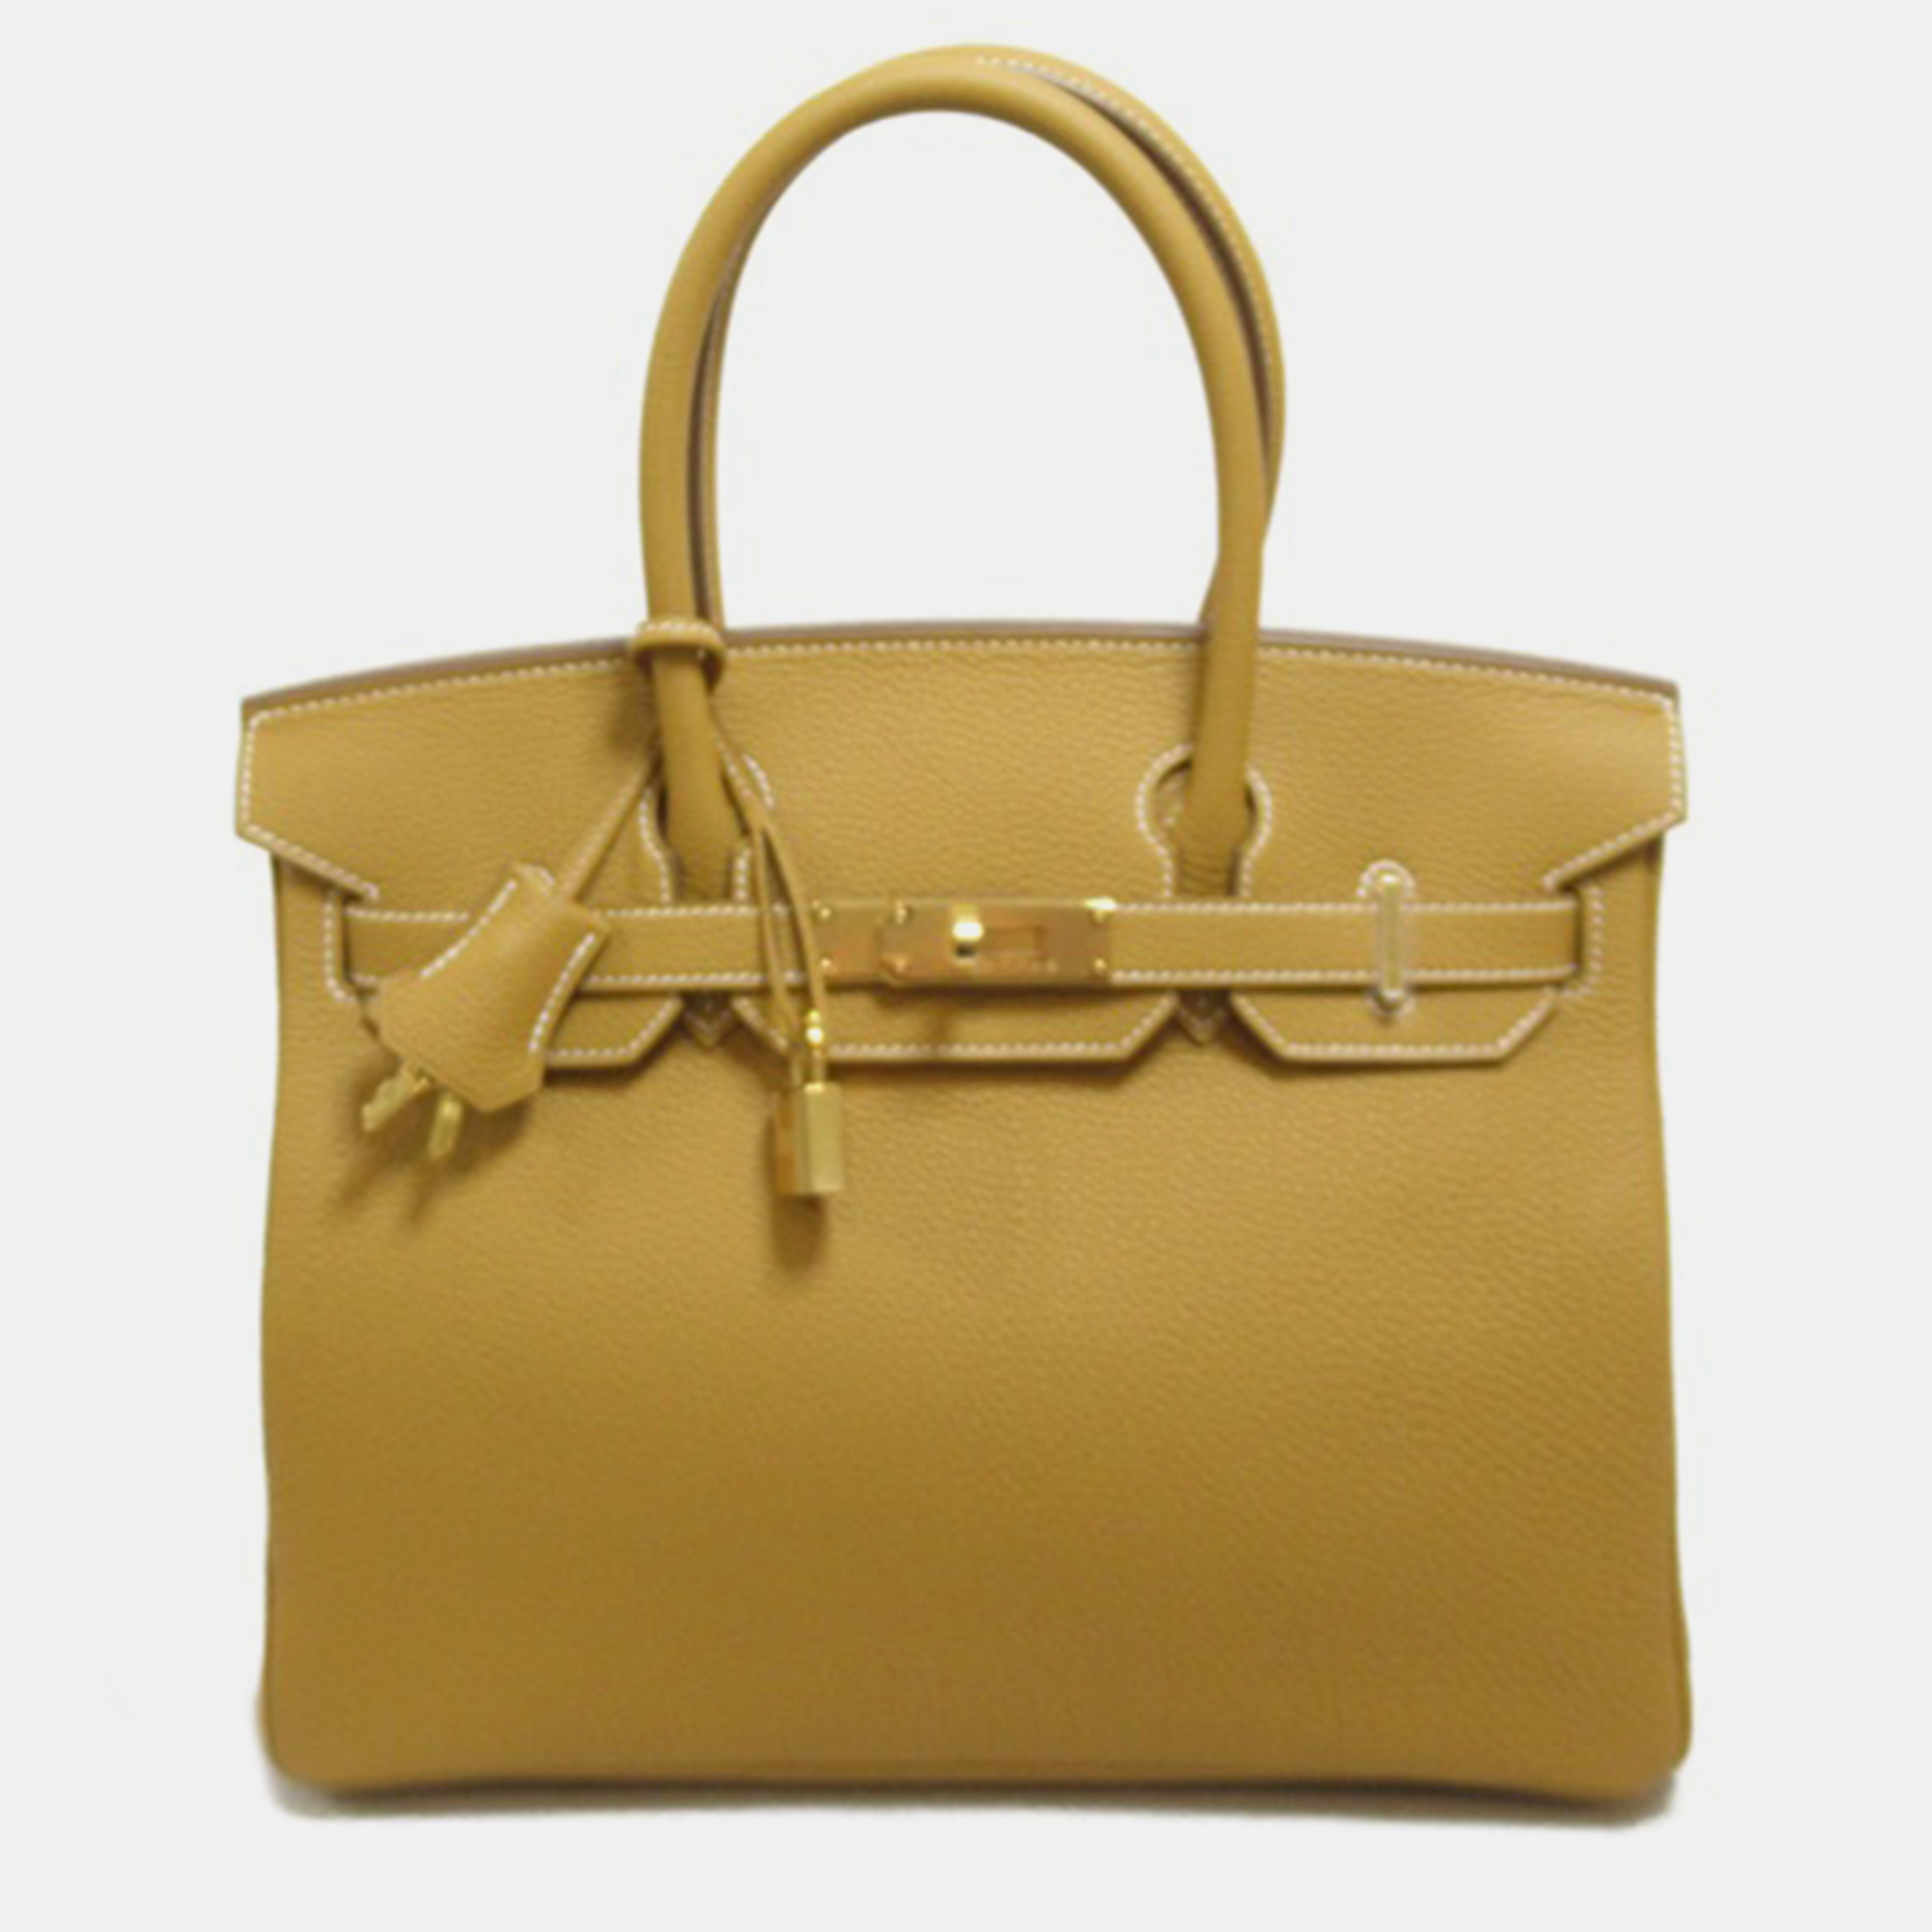 Pre-owned Hermes Yellow Togo Leather Birkin 30 Bag